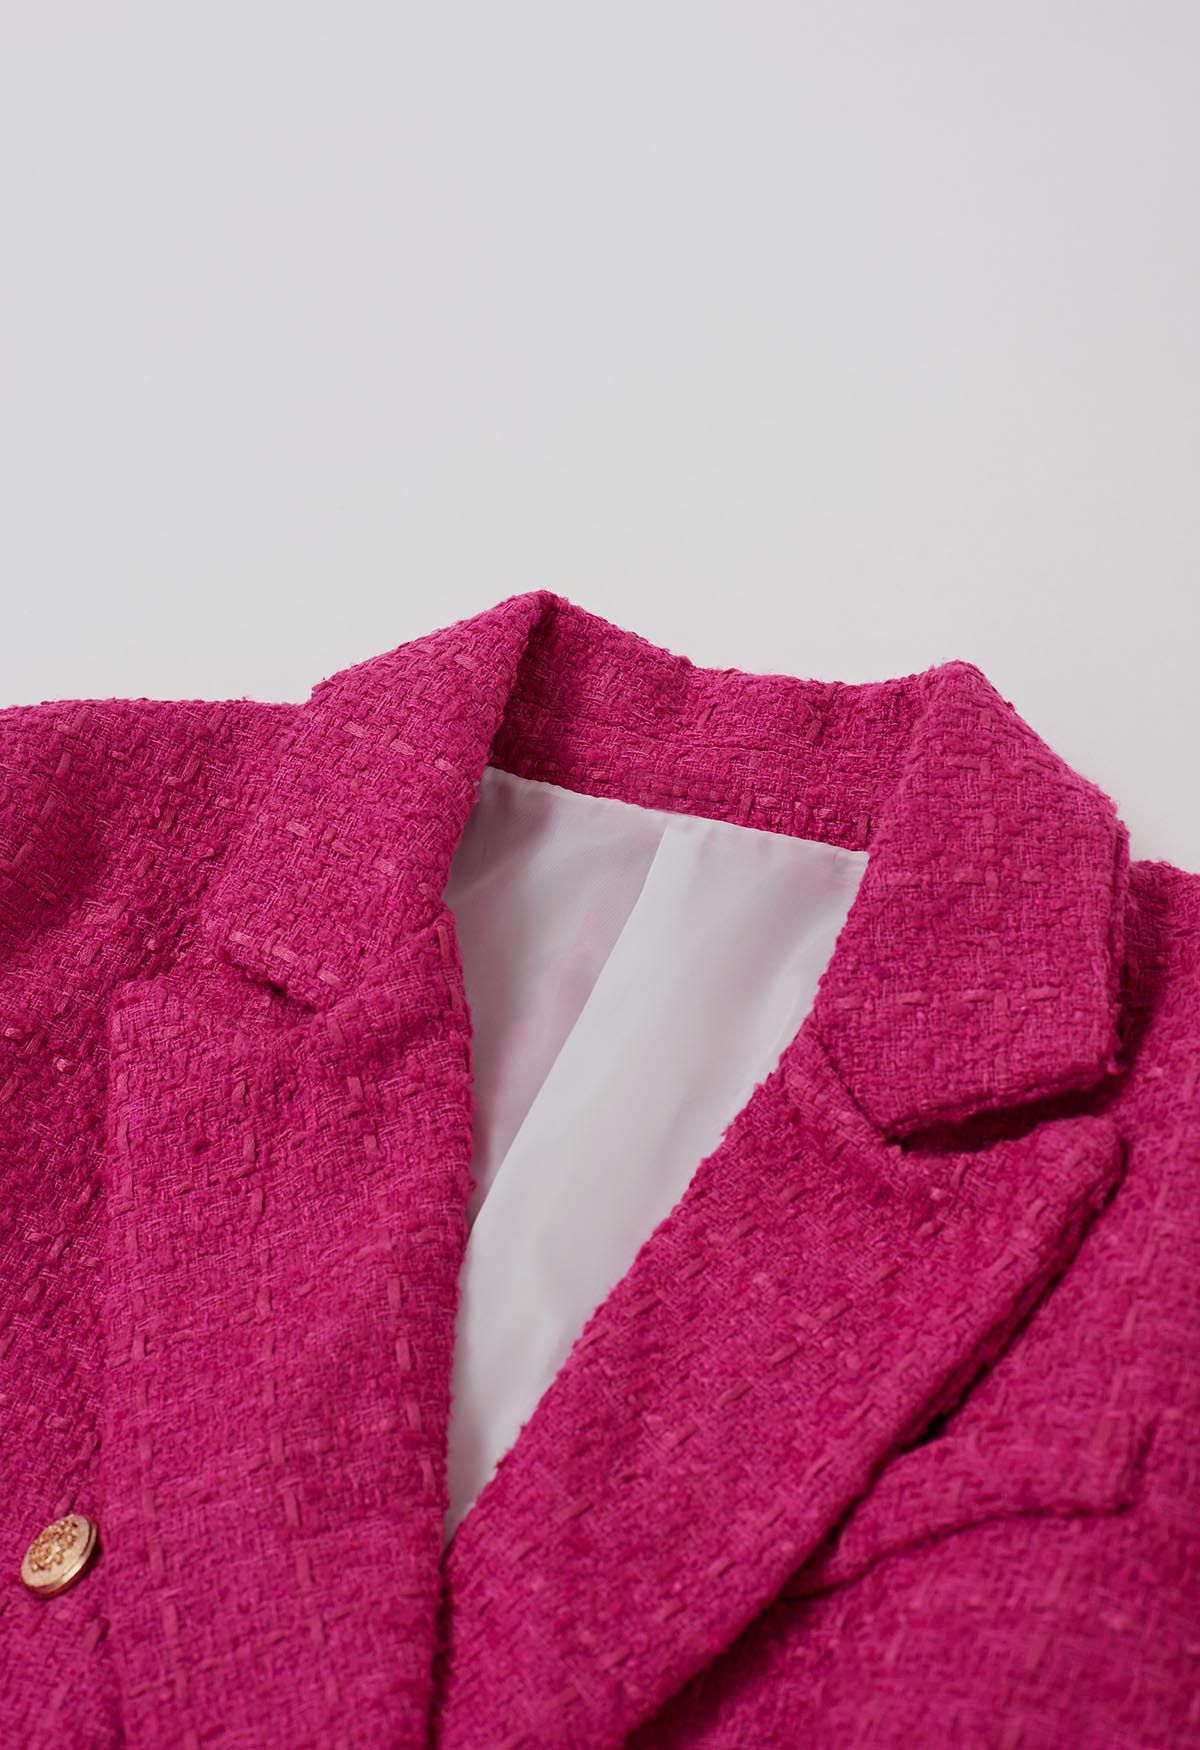 Check Tweed Double-Breasted Blazer in Hot Pink